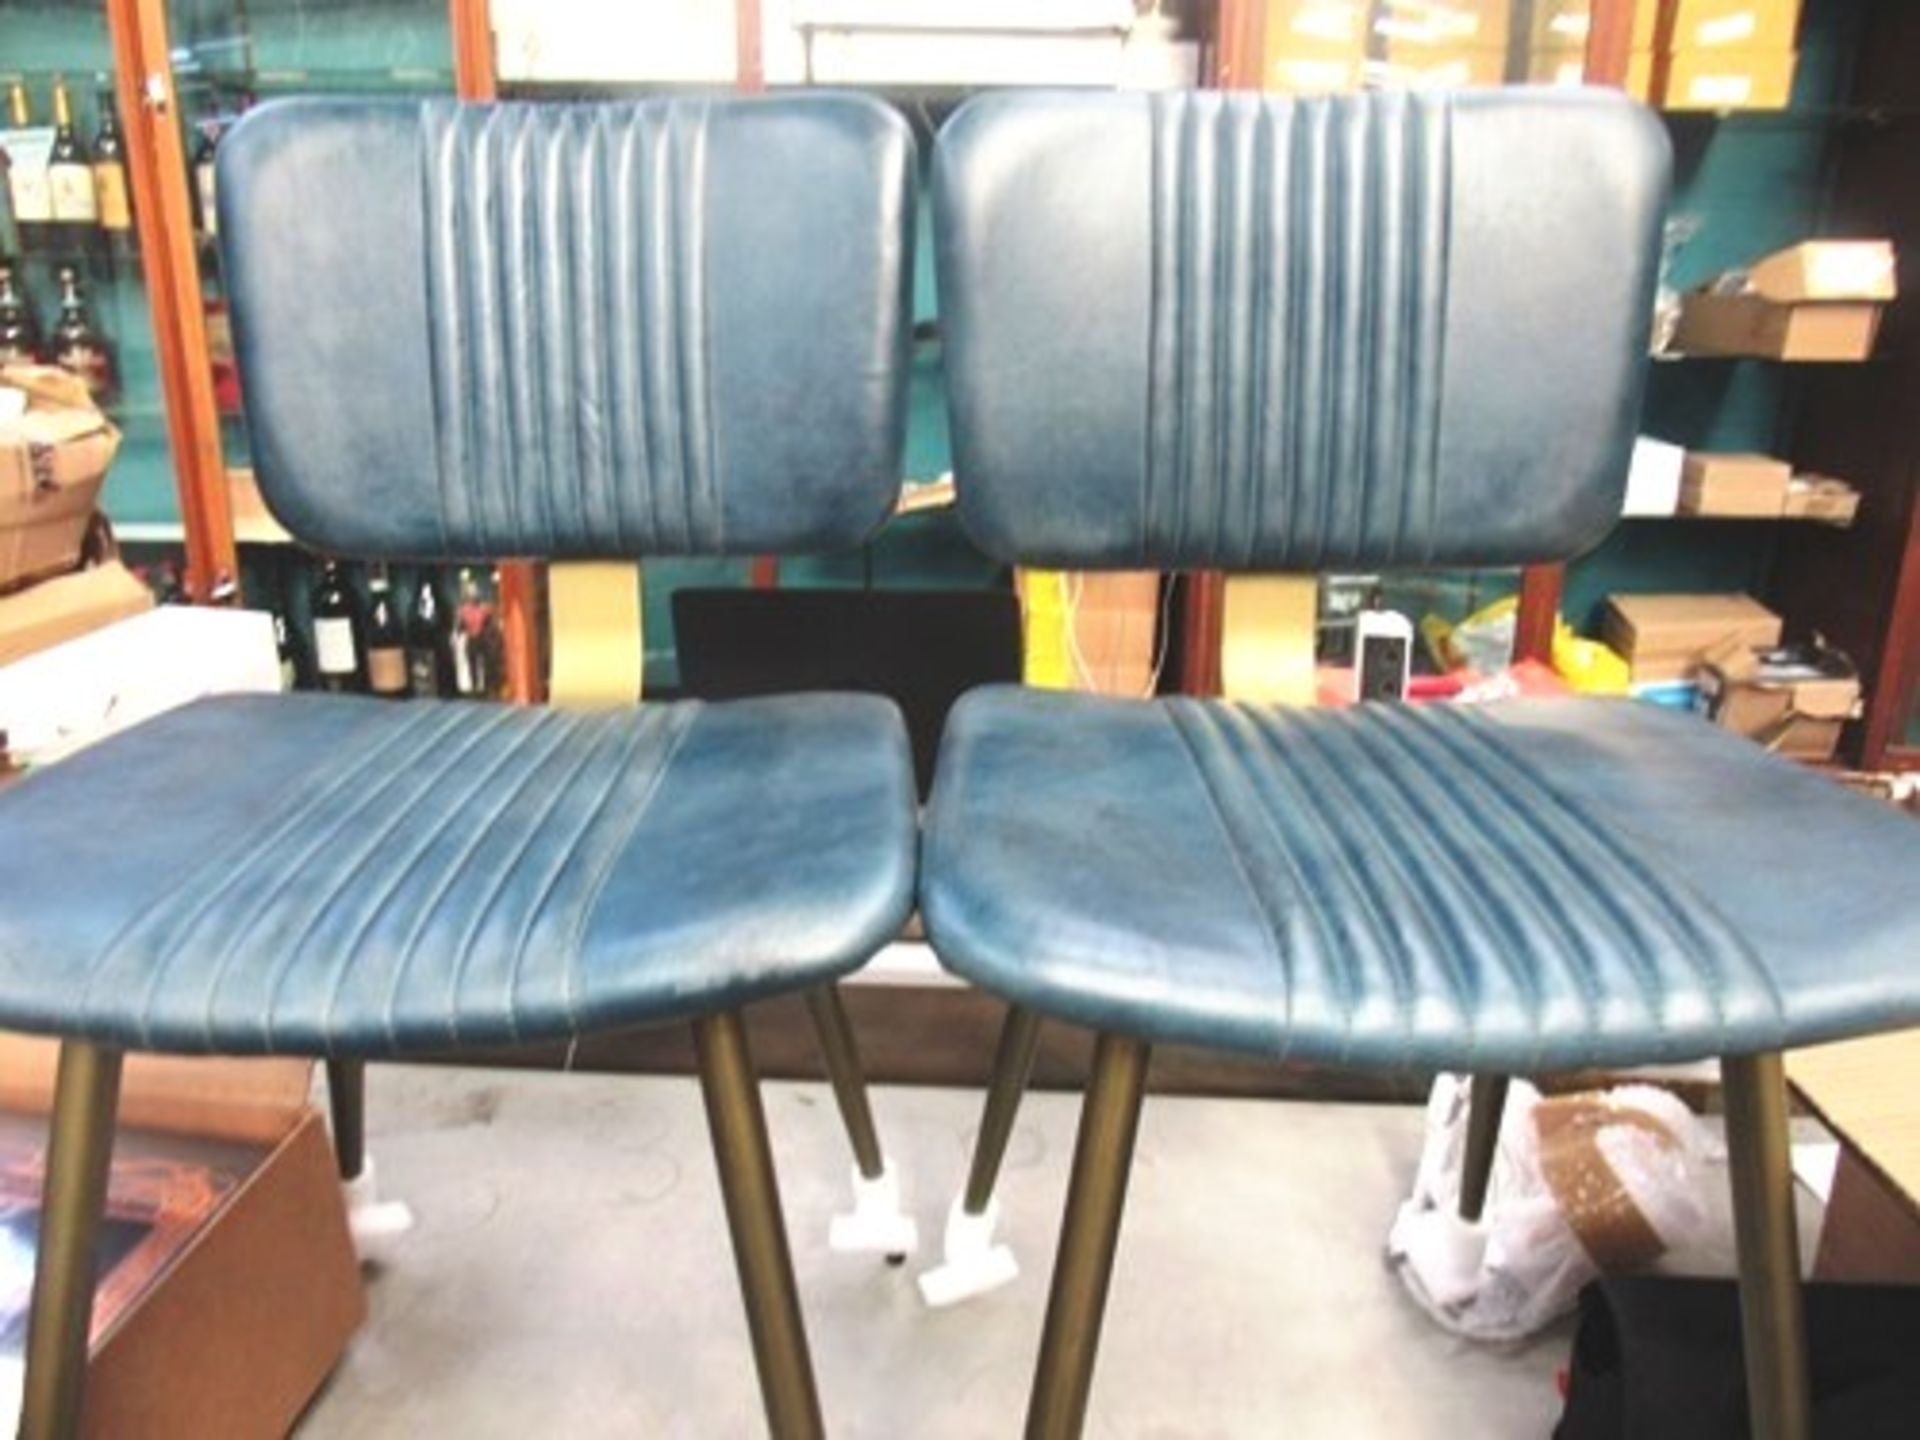 2 x Where Saints leather chairs, model Enfield - New (ctab)